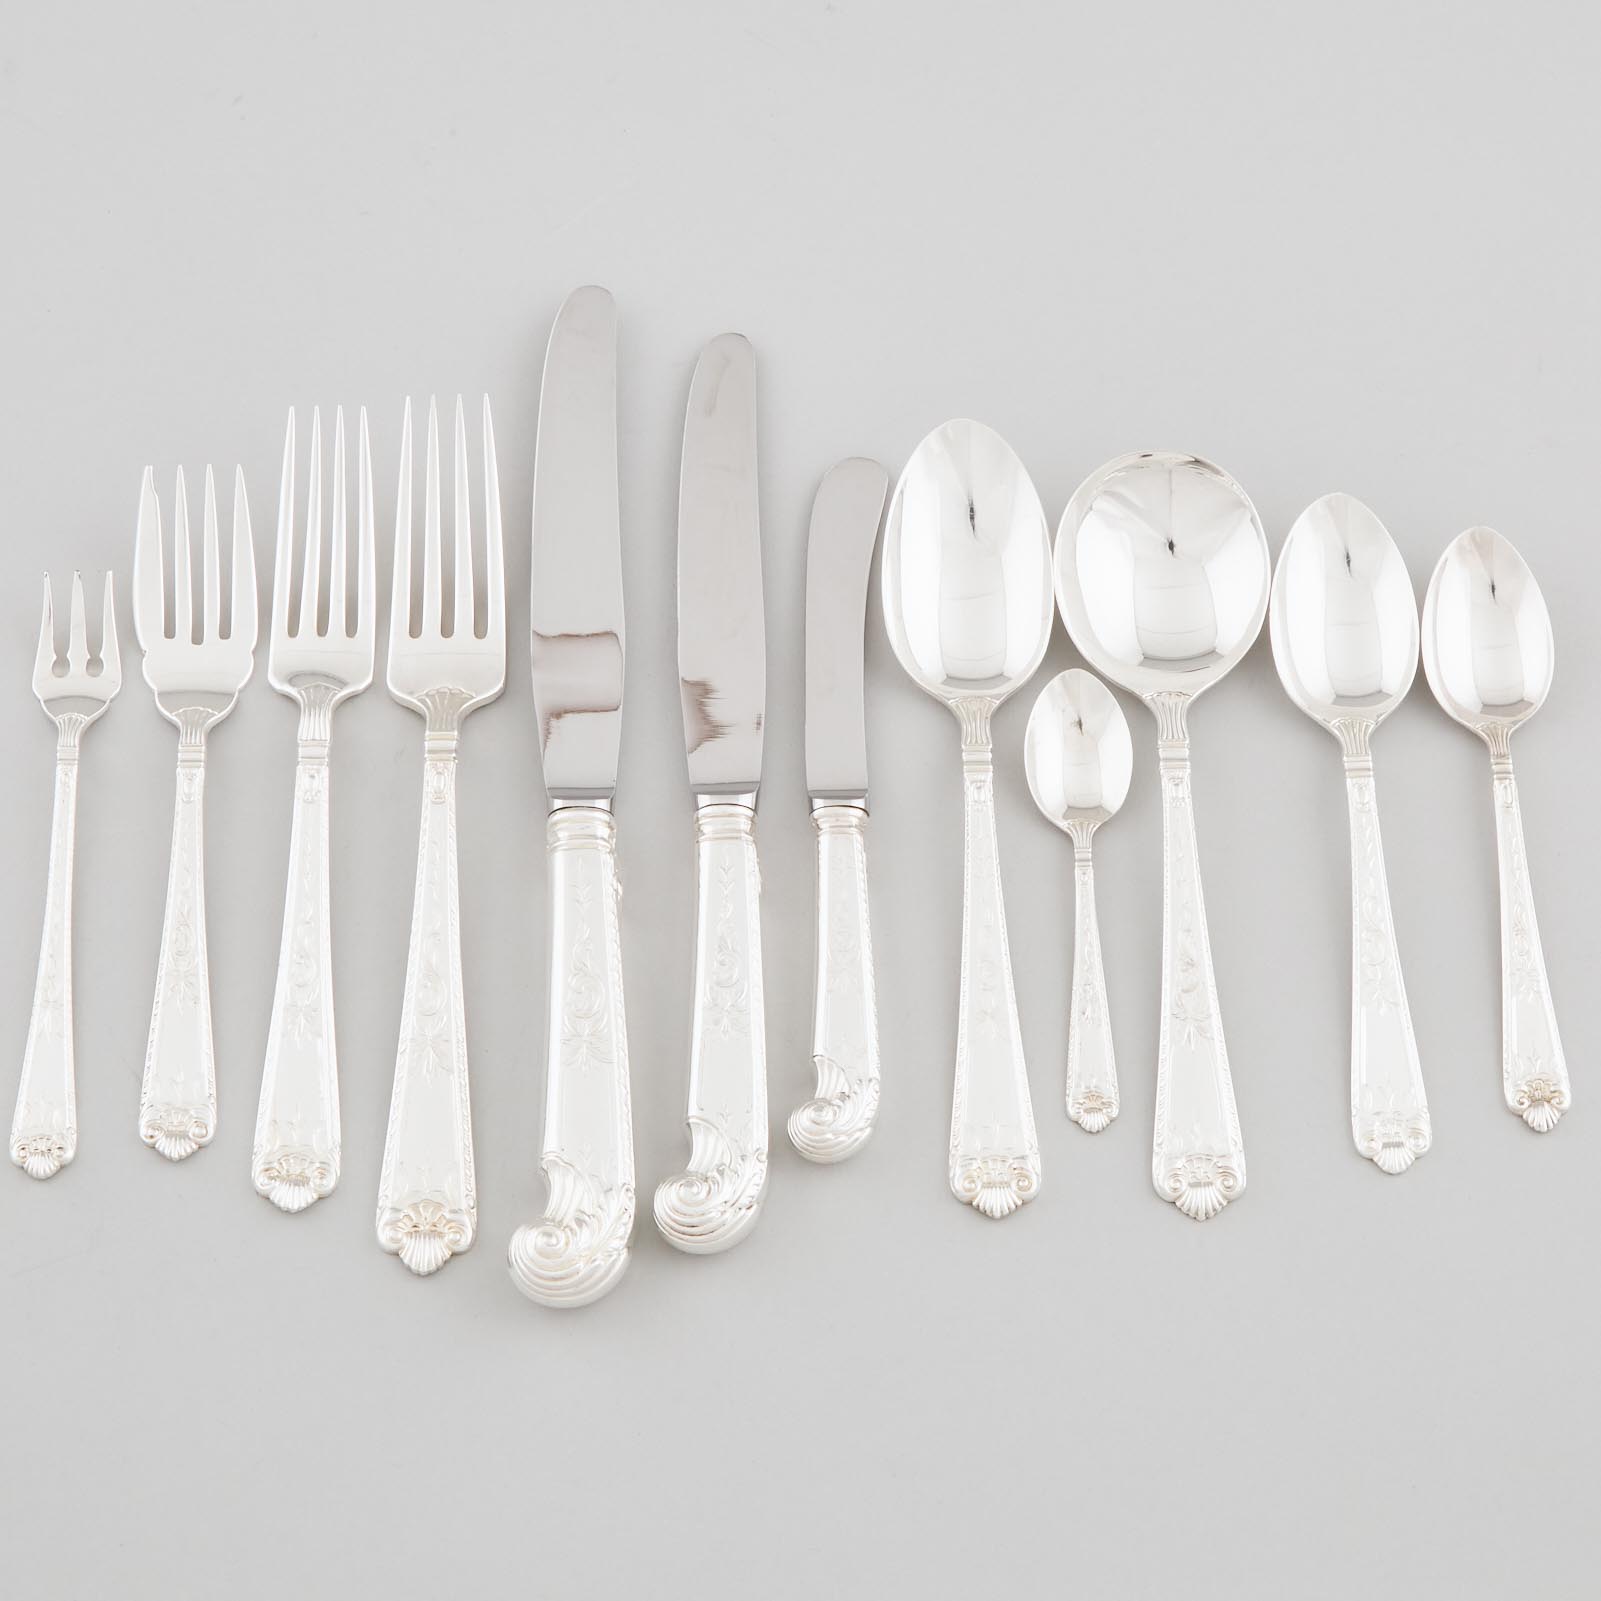 Canadian Silver 'George II Engraved' Pattern Flatware Service, Henry Birks & Sons, Montreal Que., 20th century